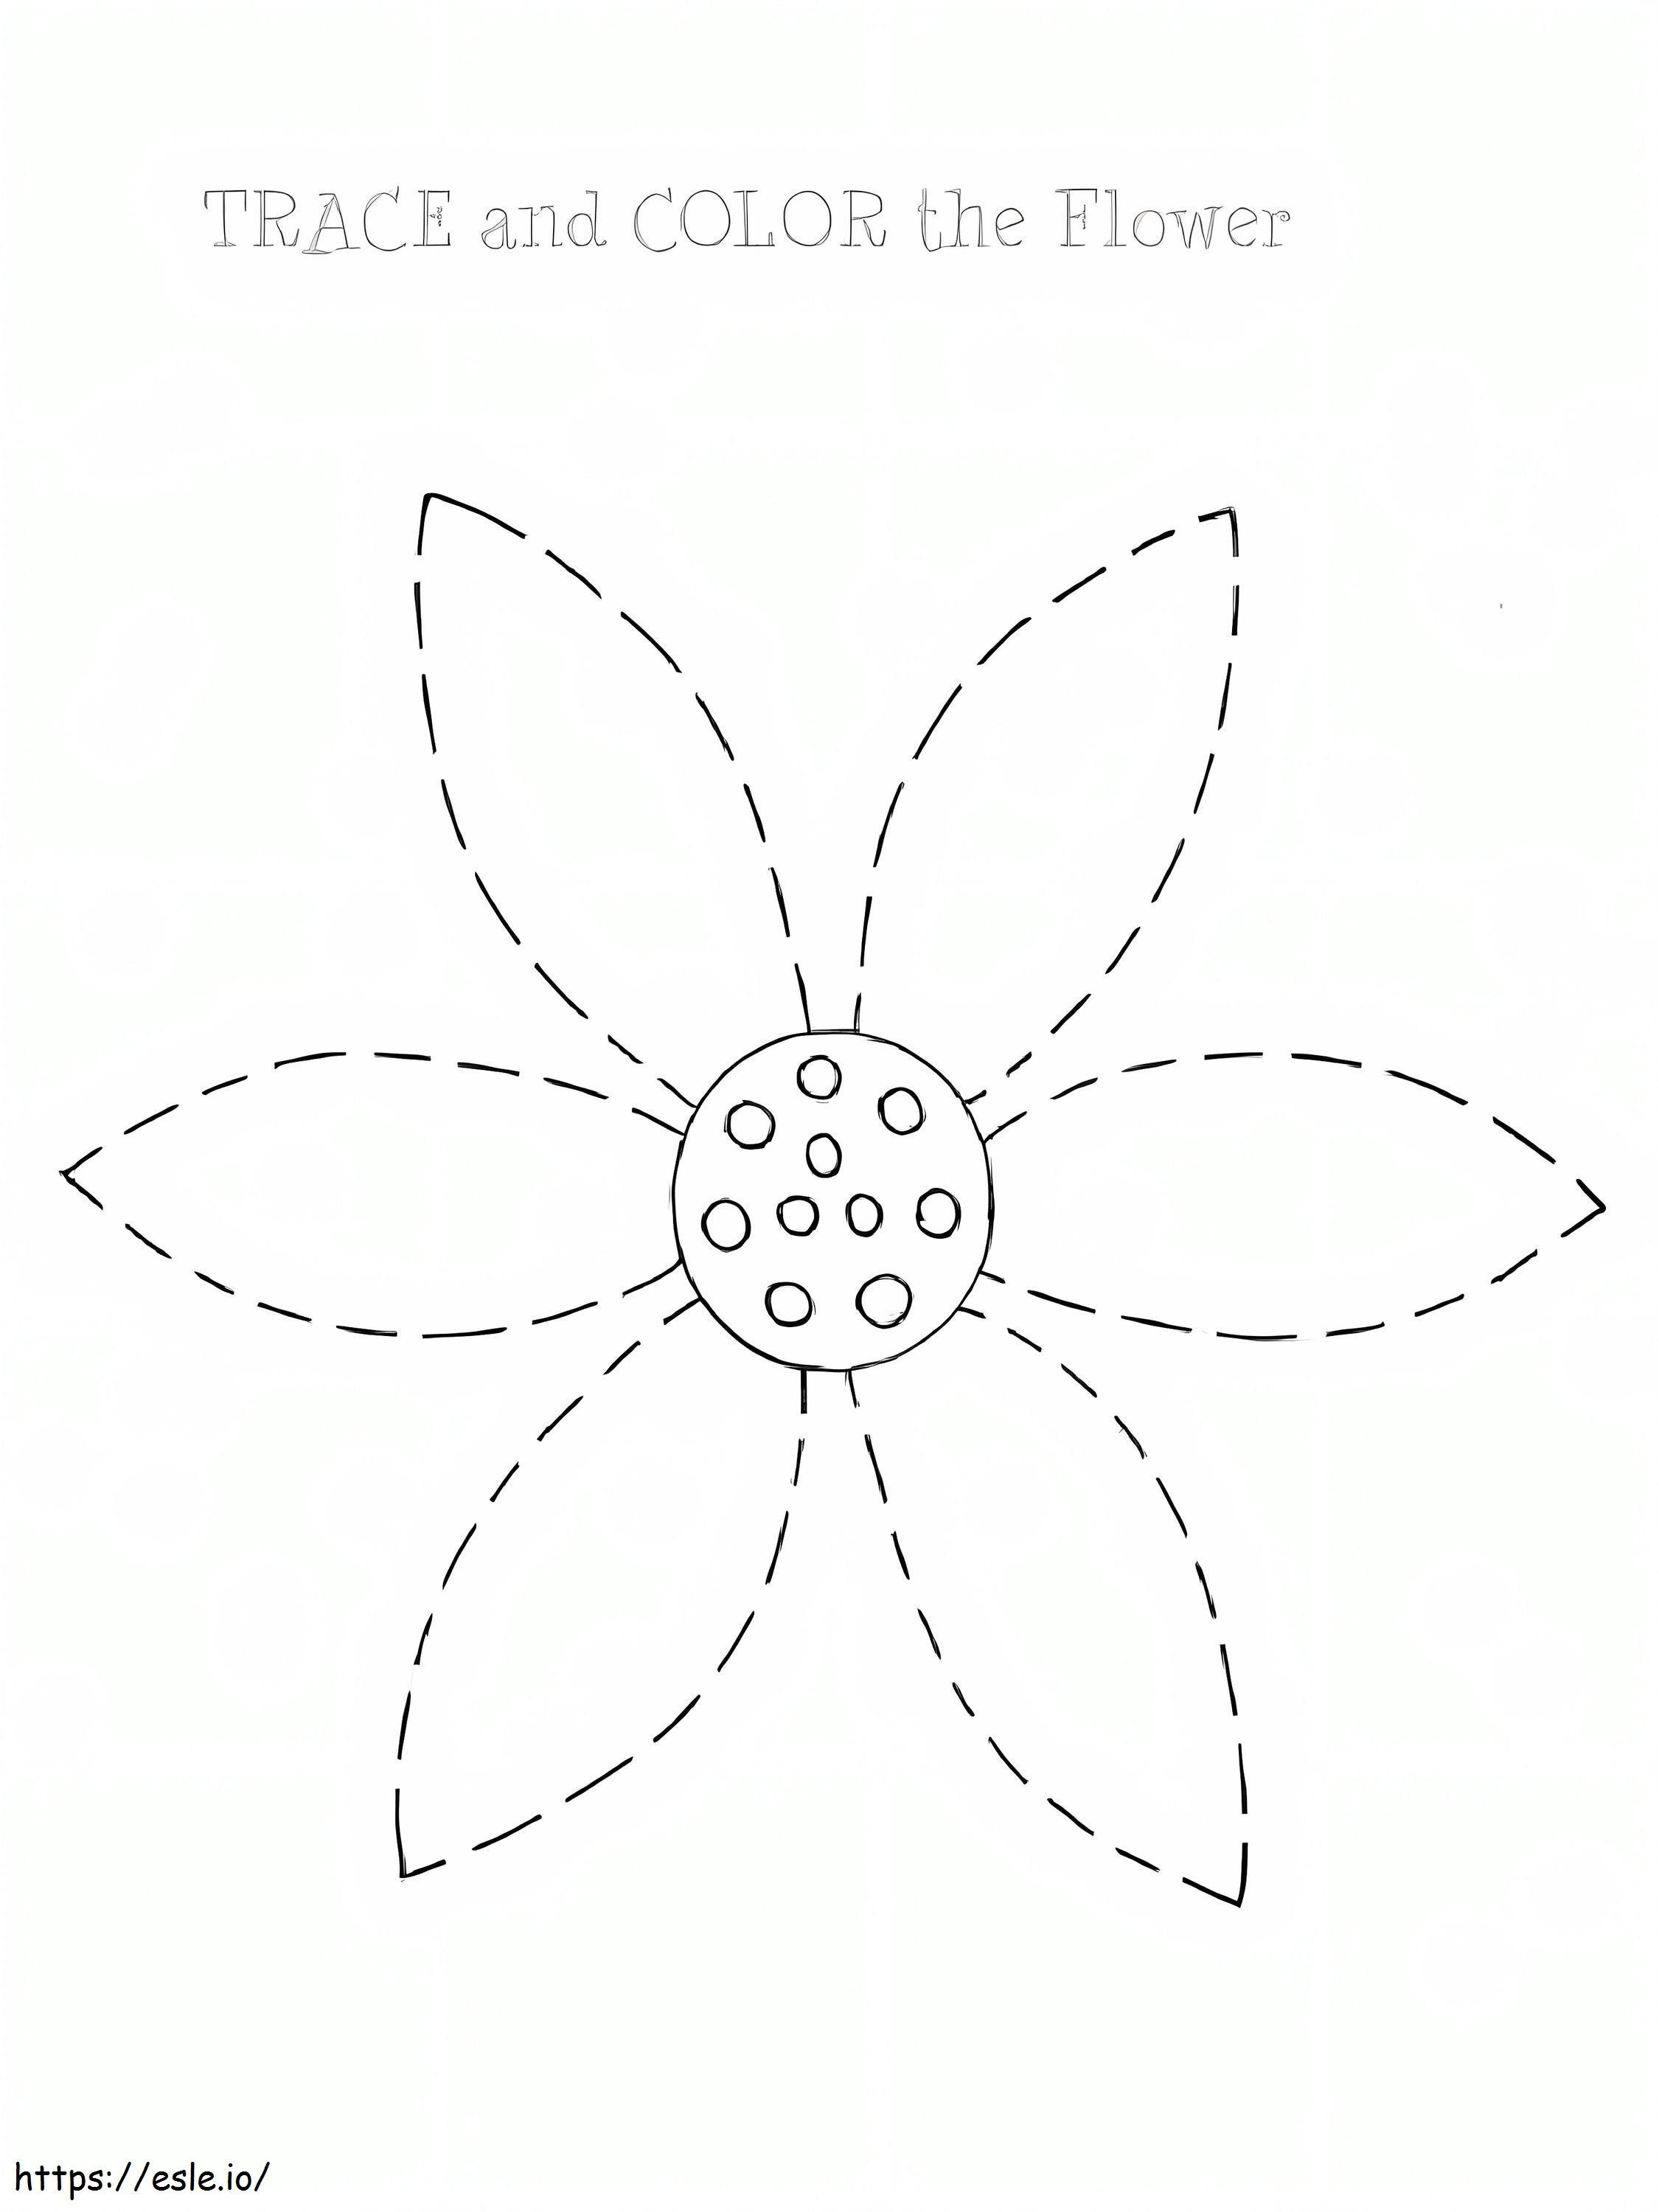 Trace The Flower coloring page